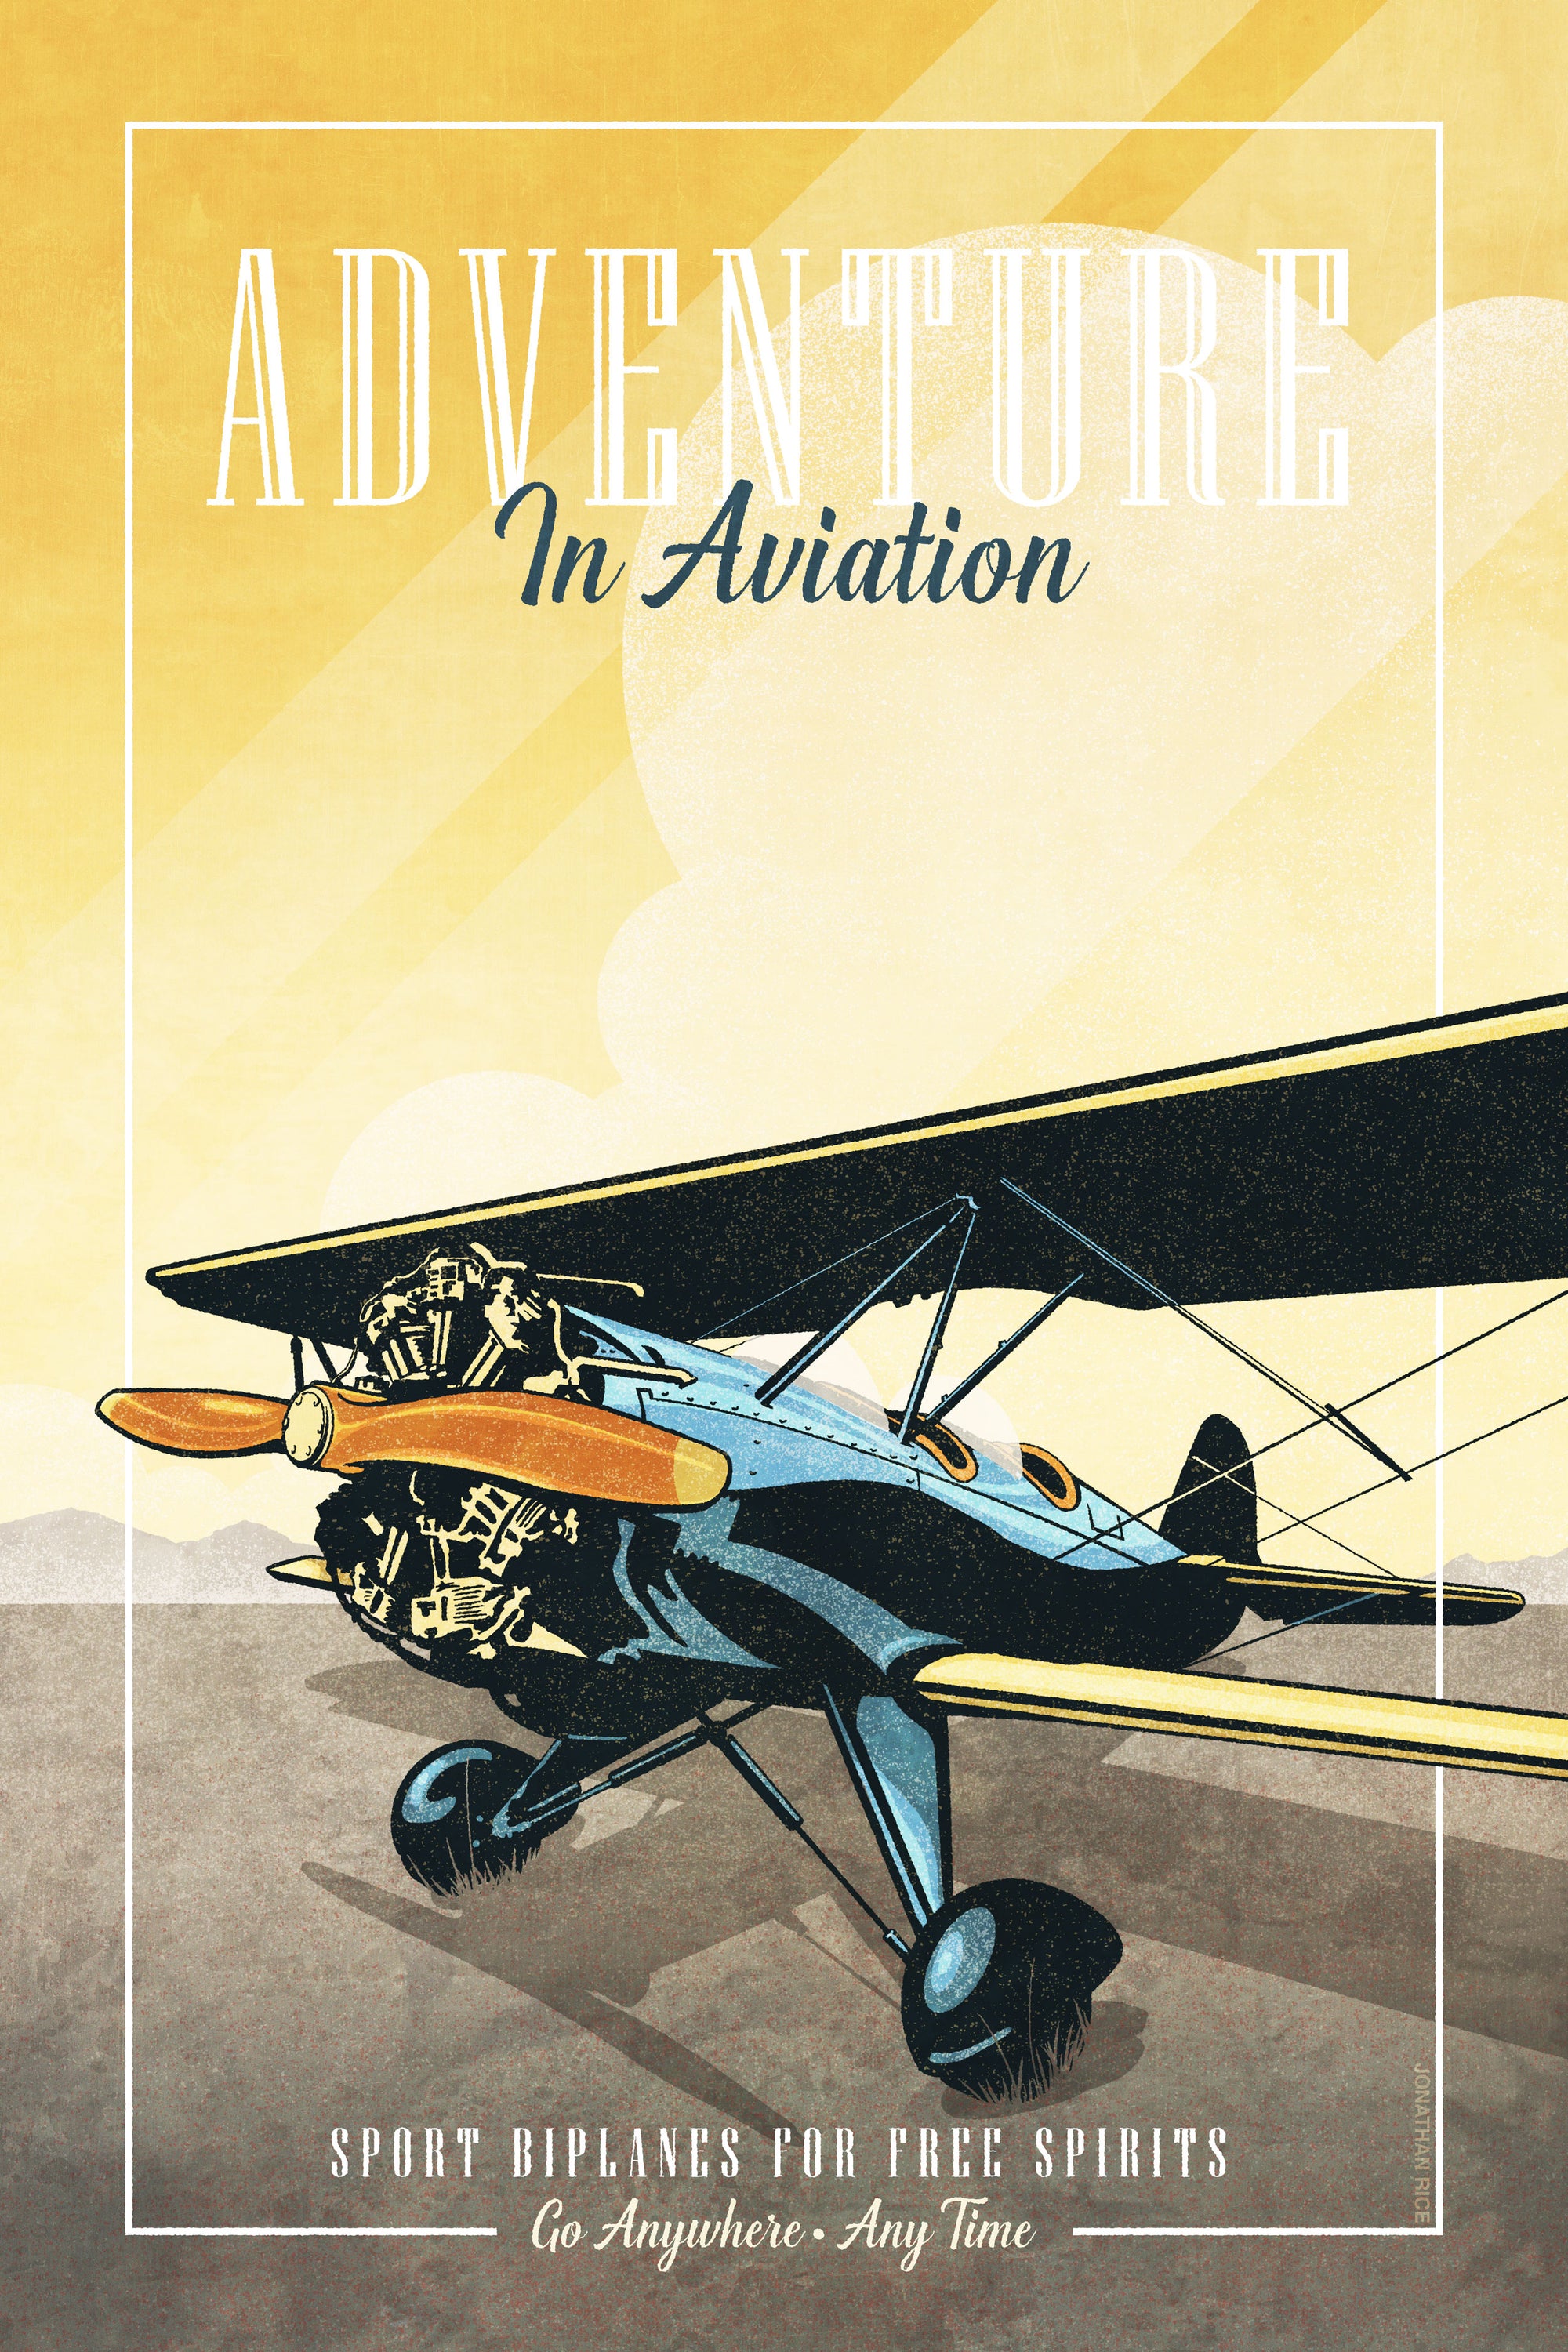 Retro style giclée art print of a modified WACO Biplane ready for takeoff. It has the words “Adventure in Aviaton” at the top. The print’s dusty yellow sunrise colors combined with bright blues and orange of the plane makes for a stunning image. There are additional words a the bottom that says “Sport biplanes for free spirits. Go Anywhere, Any Time.”.